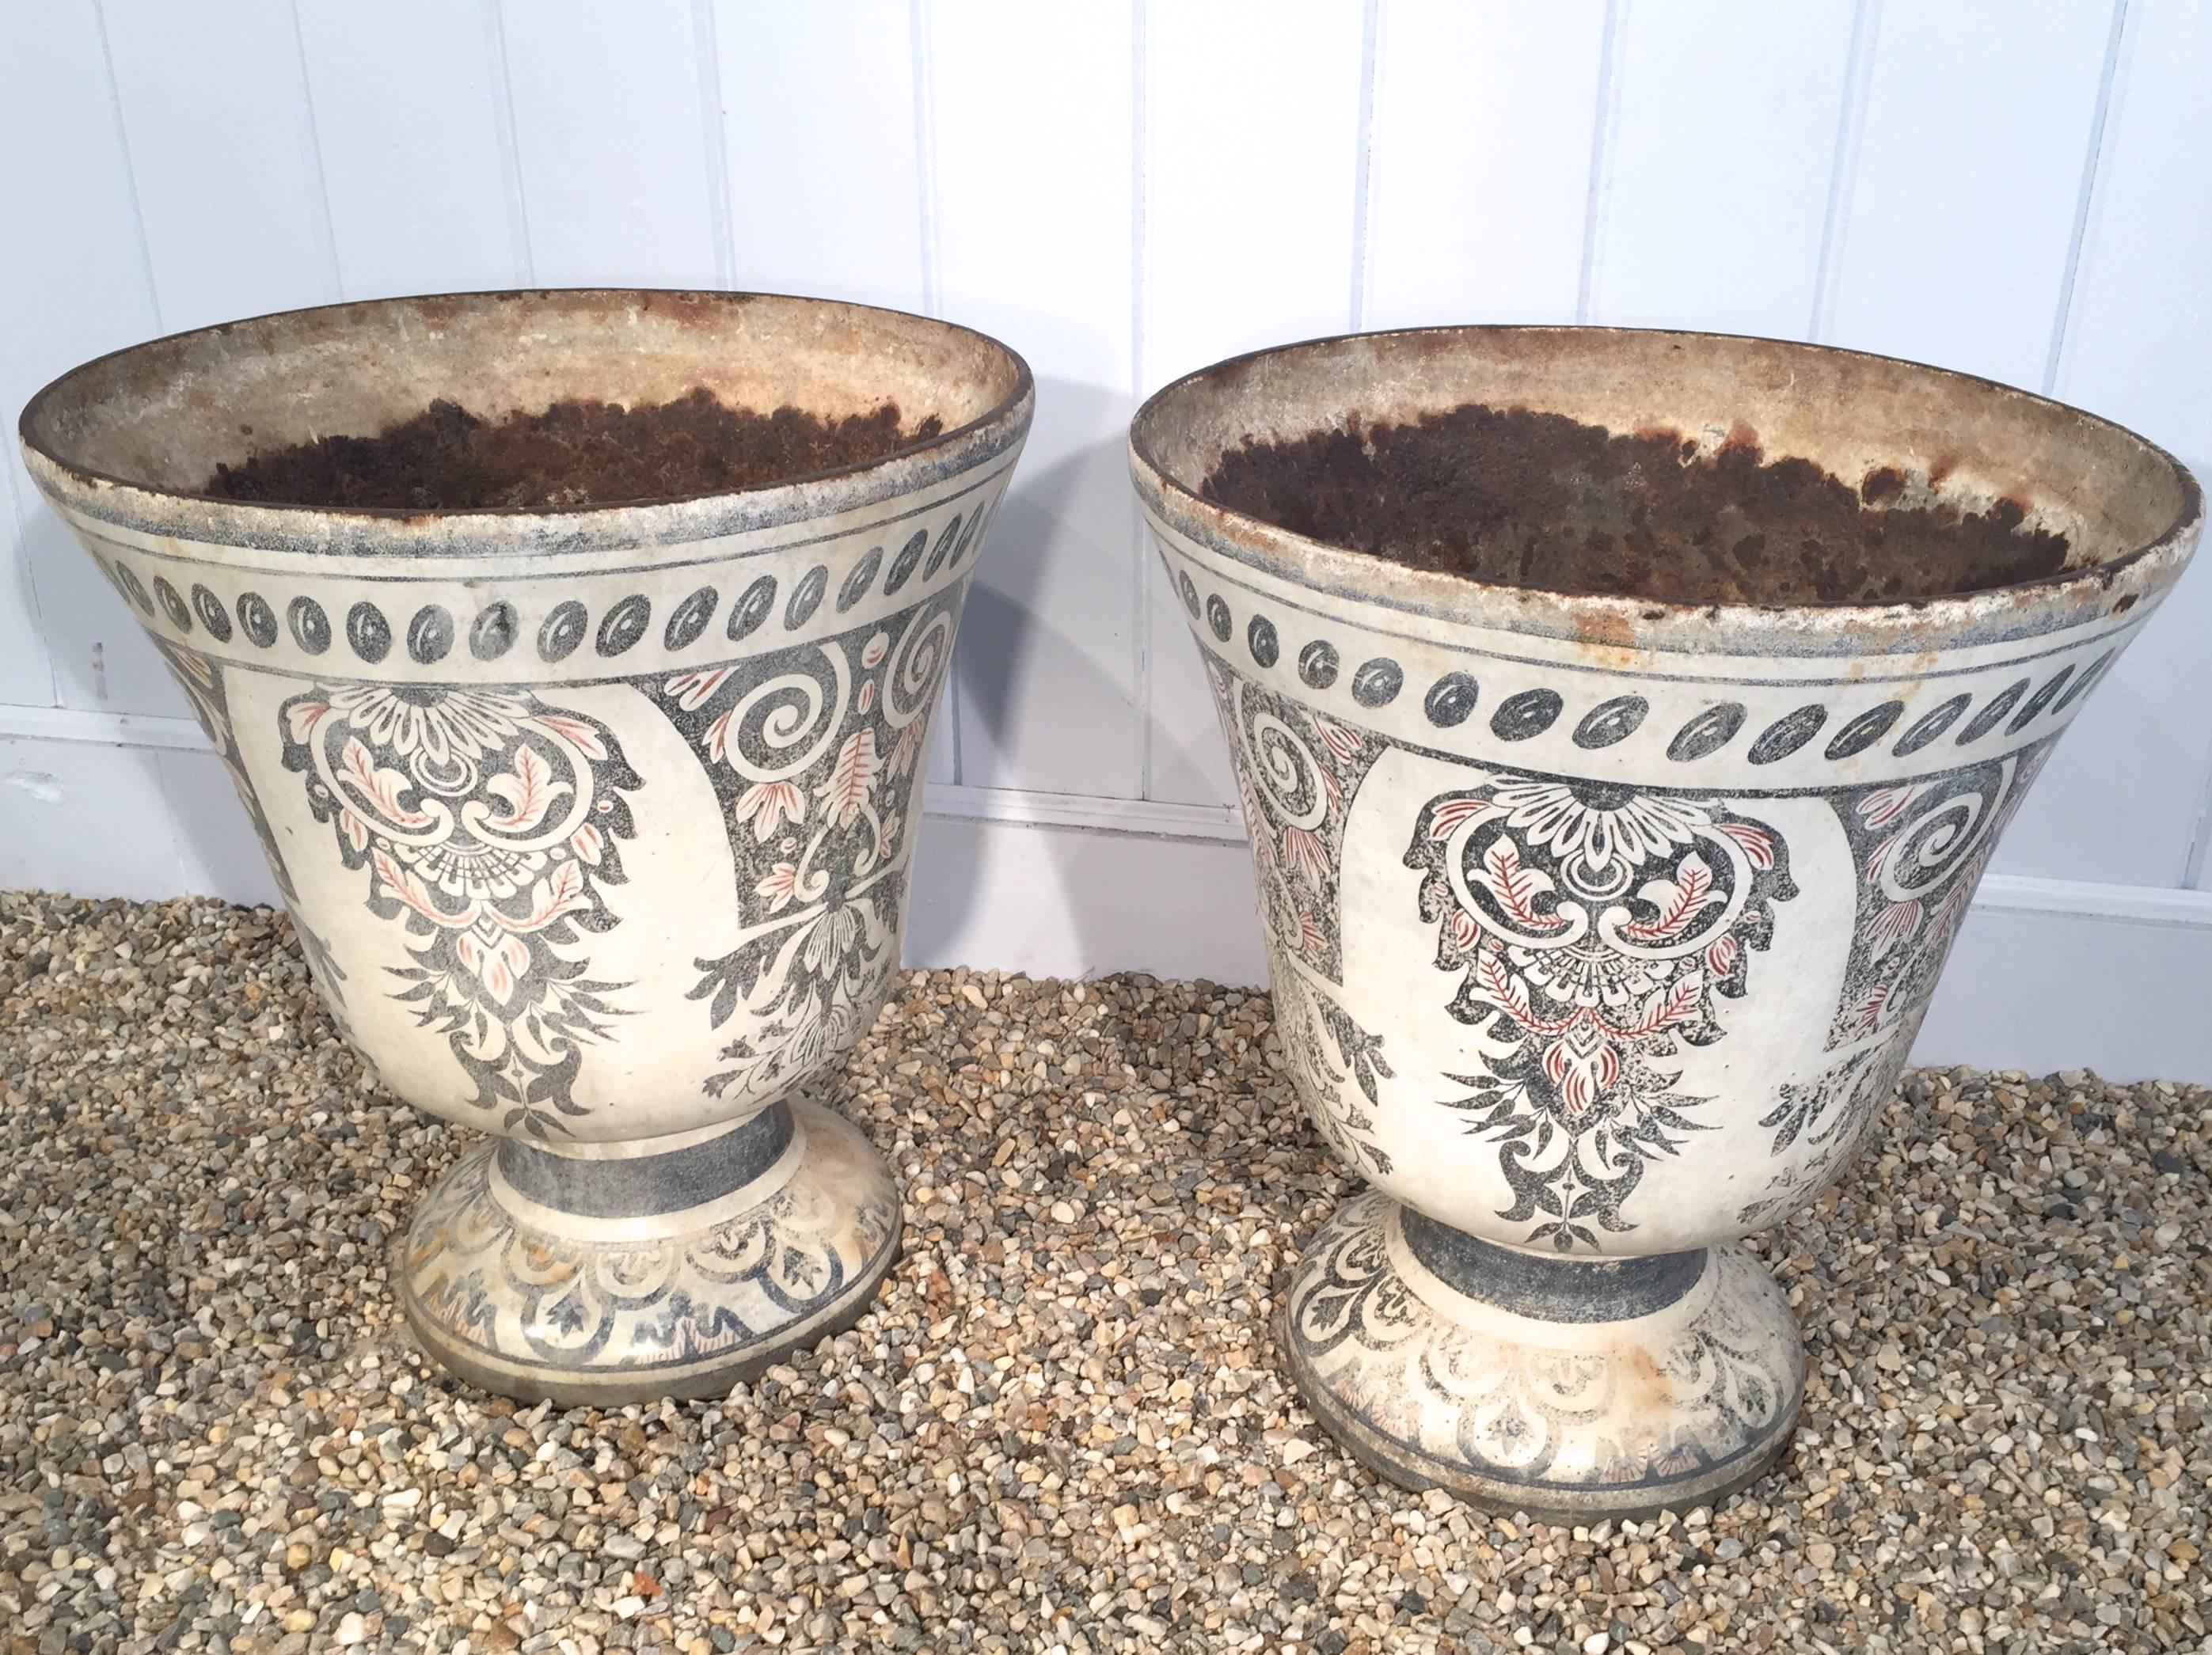 19th Century Pair Enameled Cast Iron Vases de Rouen from Oprah Winfrey's Personal Collection